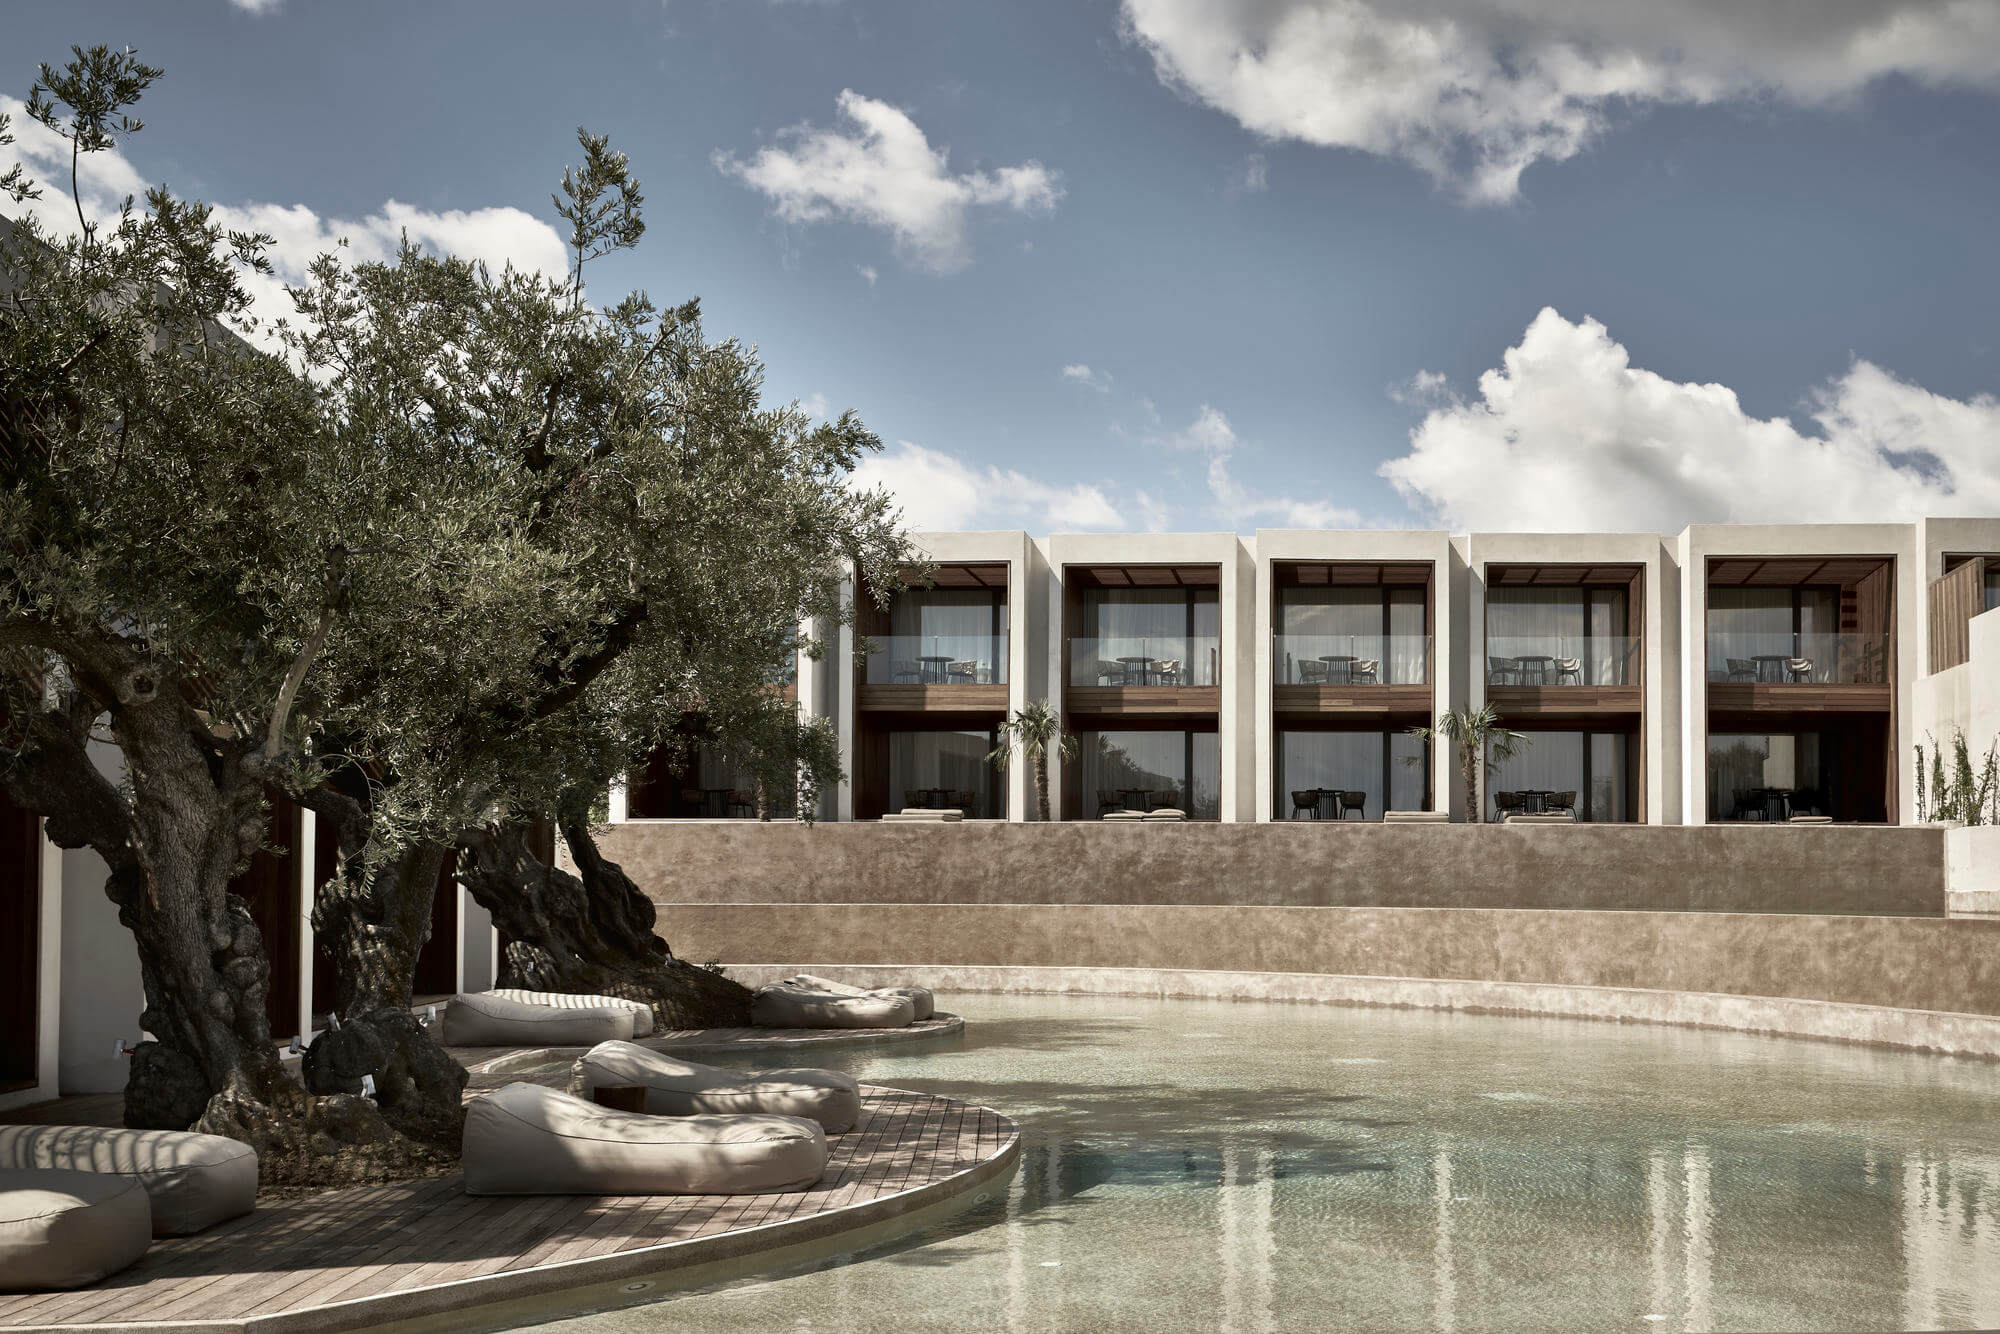 The Olea Suites Hotel - BLOCK722 Architects+